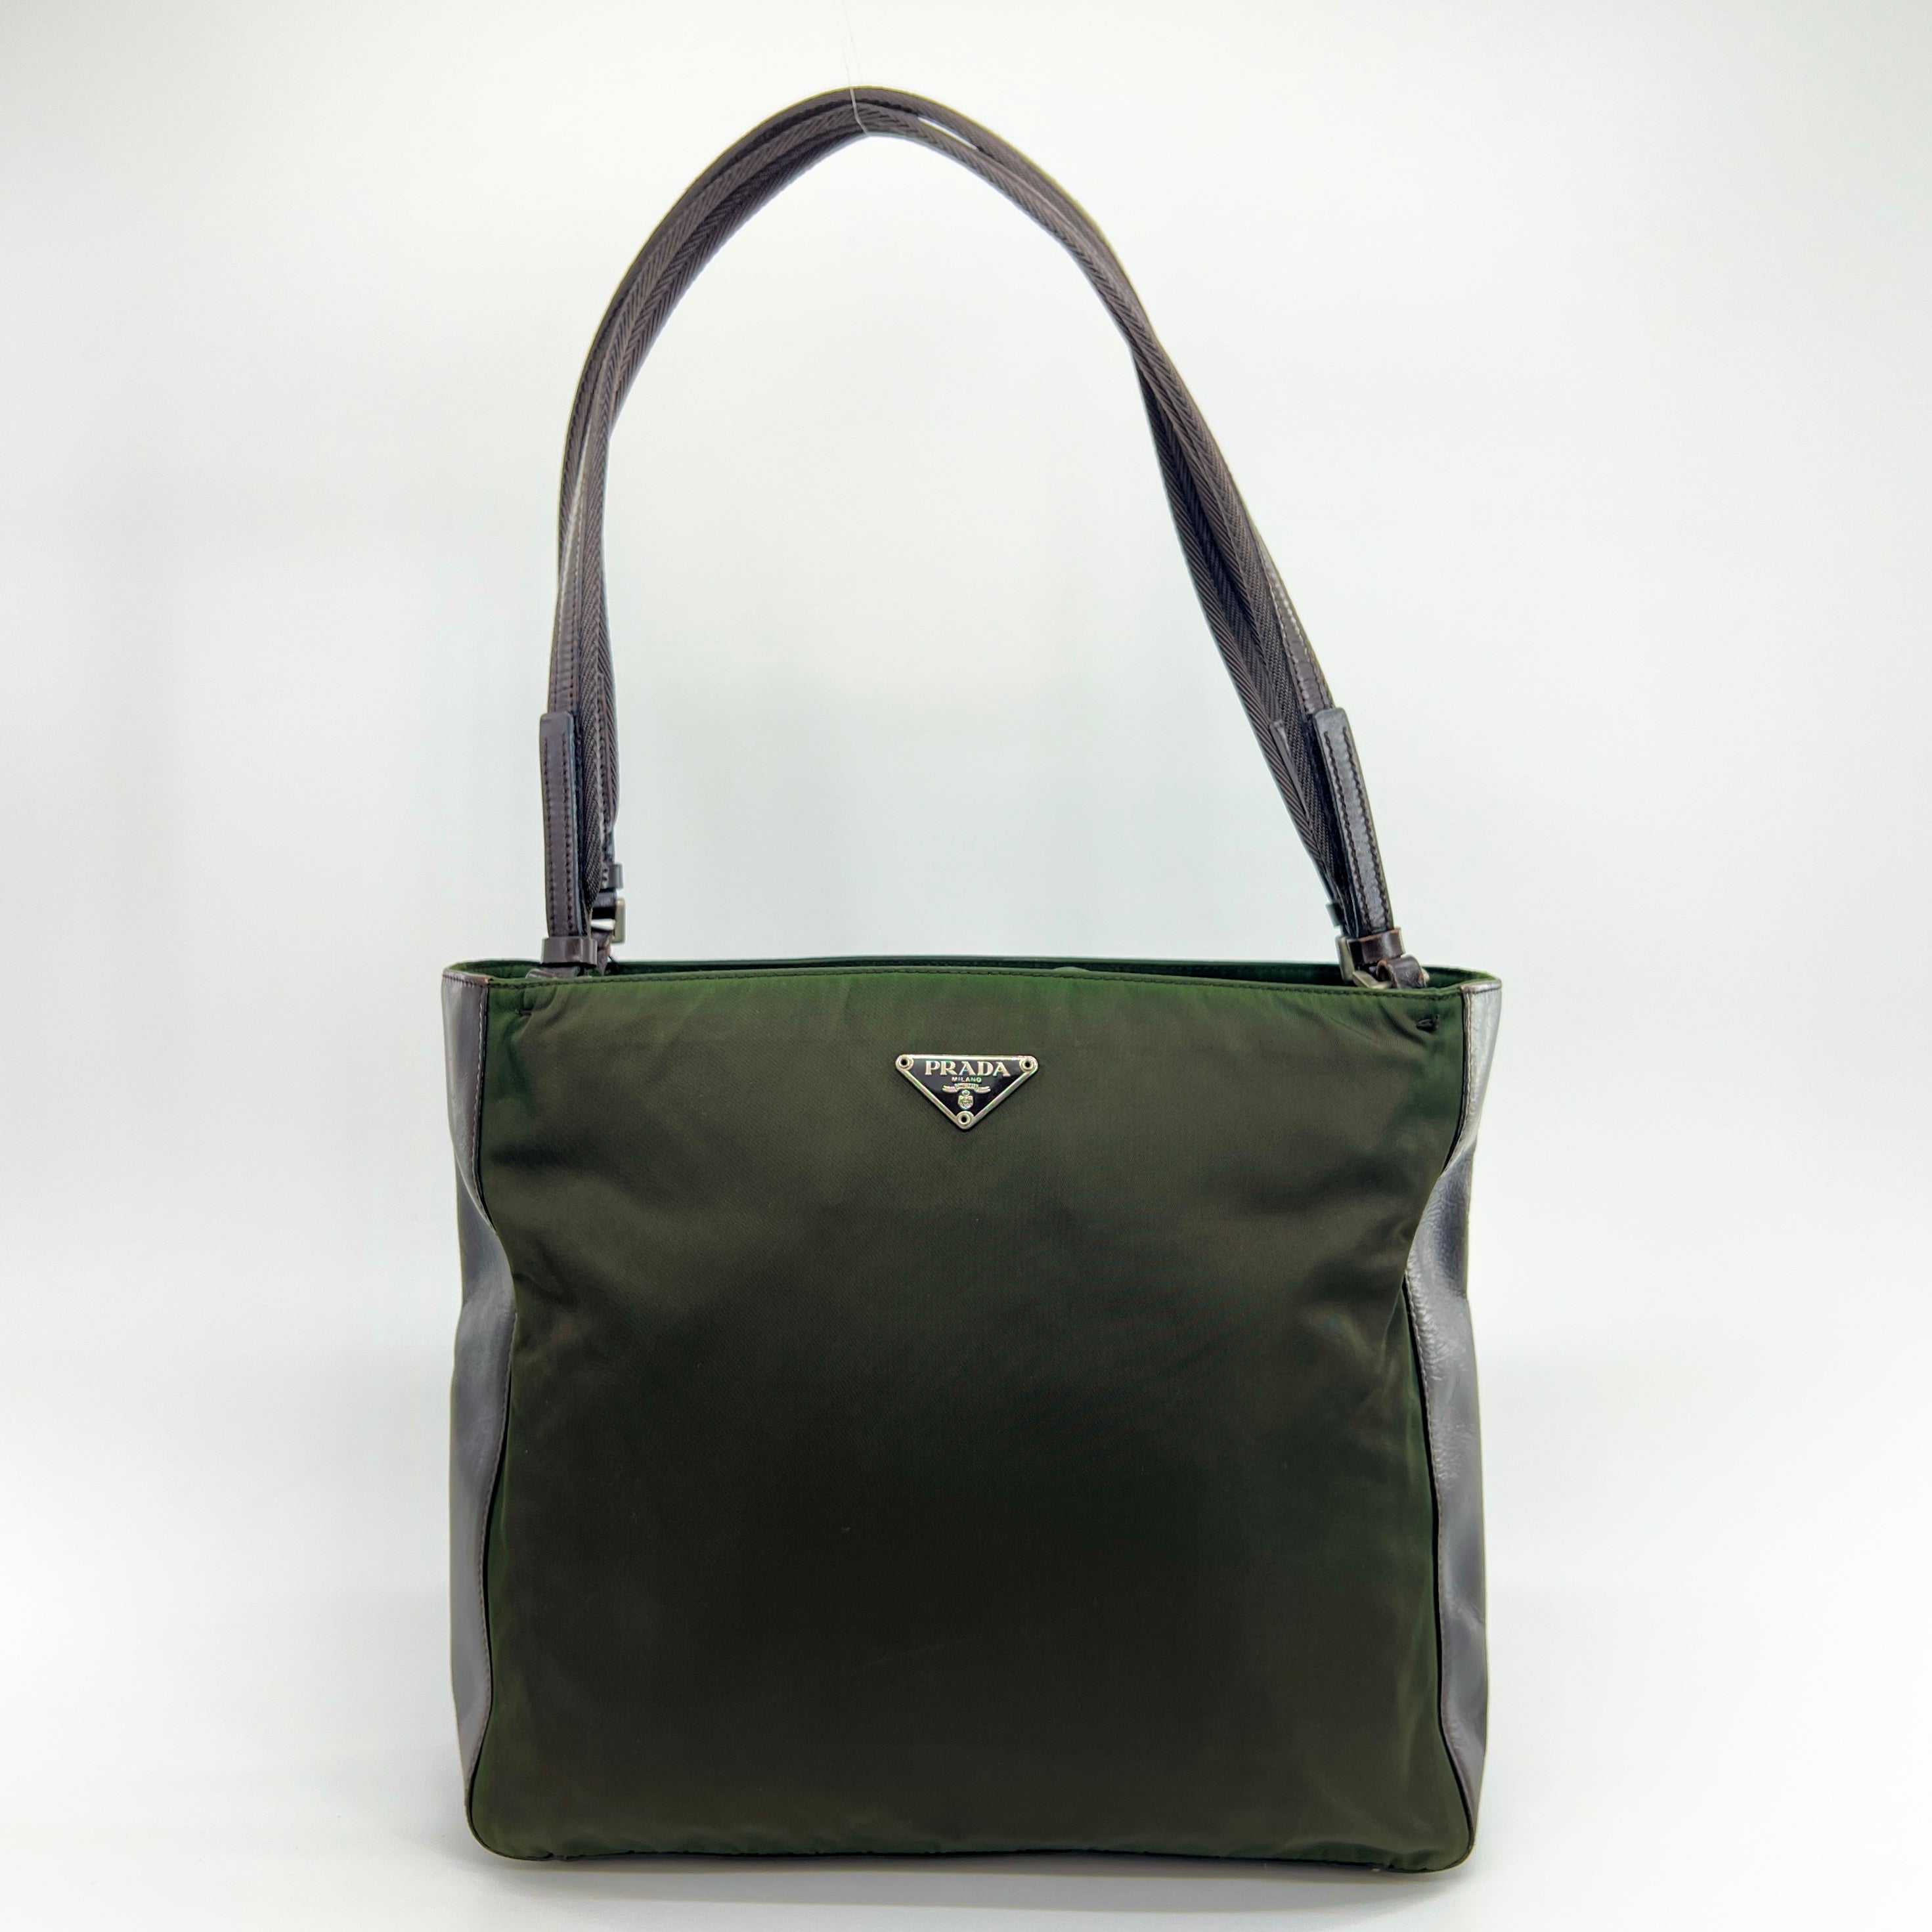 Nylon Leather Tote Small Shoulder Bag Green Brown